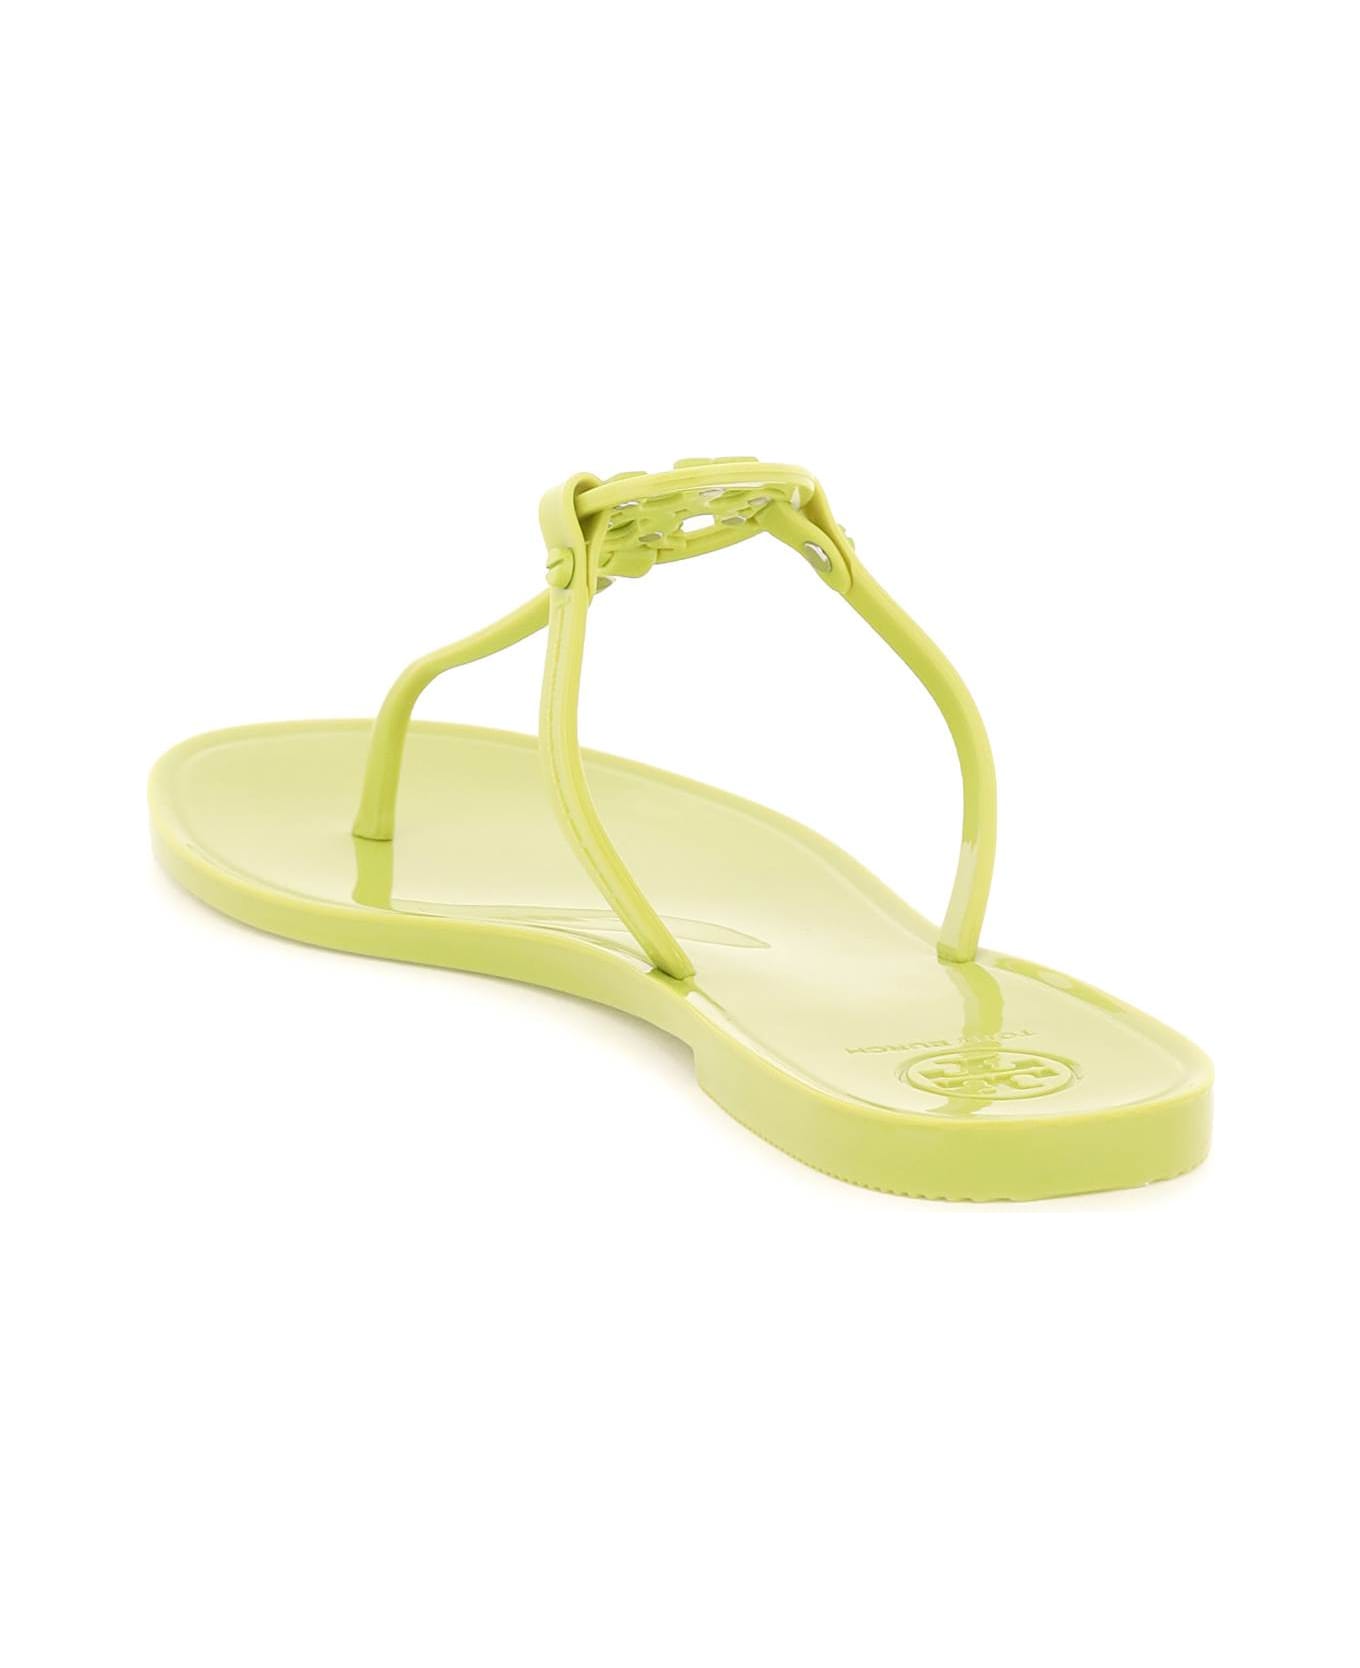 Tory Burch 'miller' Jelly Sandals - LEAF GREEN (Green)